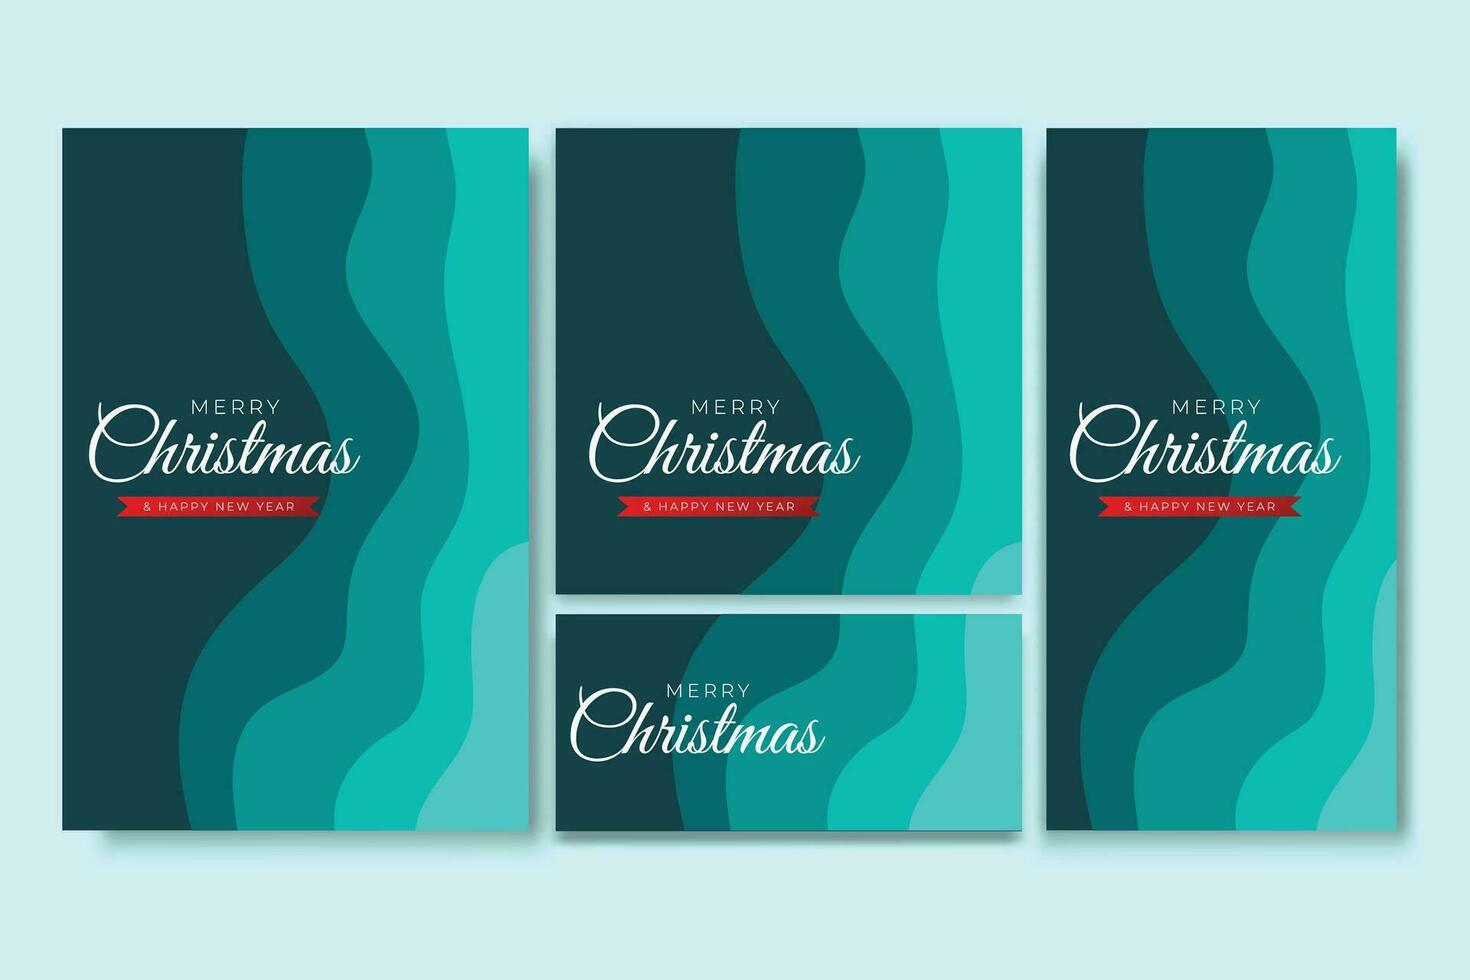 Merry Christmas Flyer and Social media Bundle Set Abstract Background 8 vector